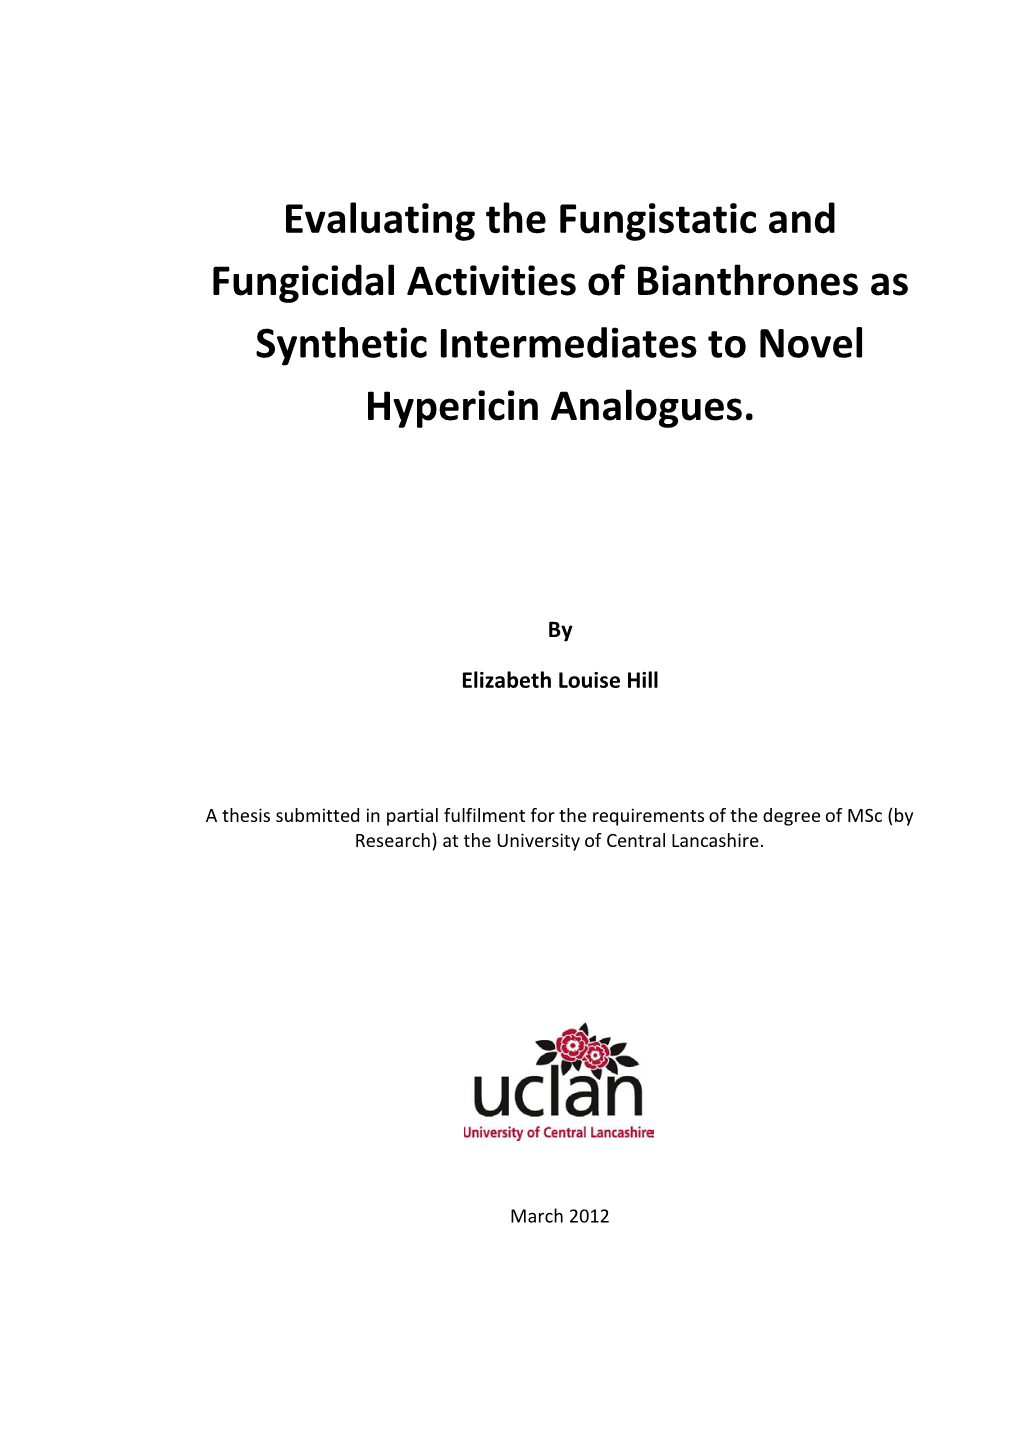 Evaluating the Fungistatic and Fungicidal Activities of Bianthrones As Synthetic Intermediates to Novel Hypericin Analogues